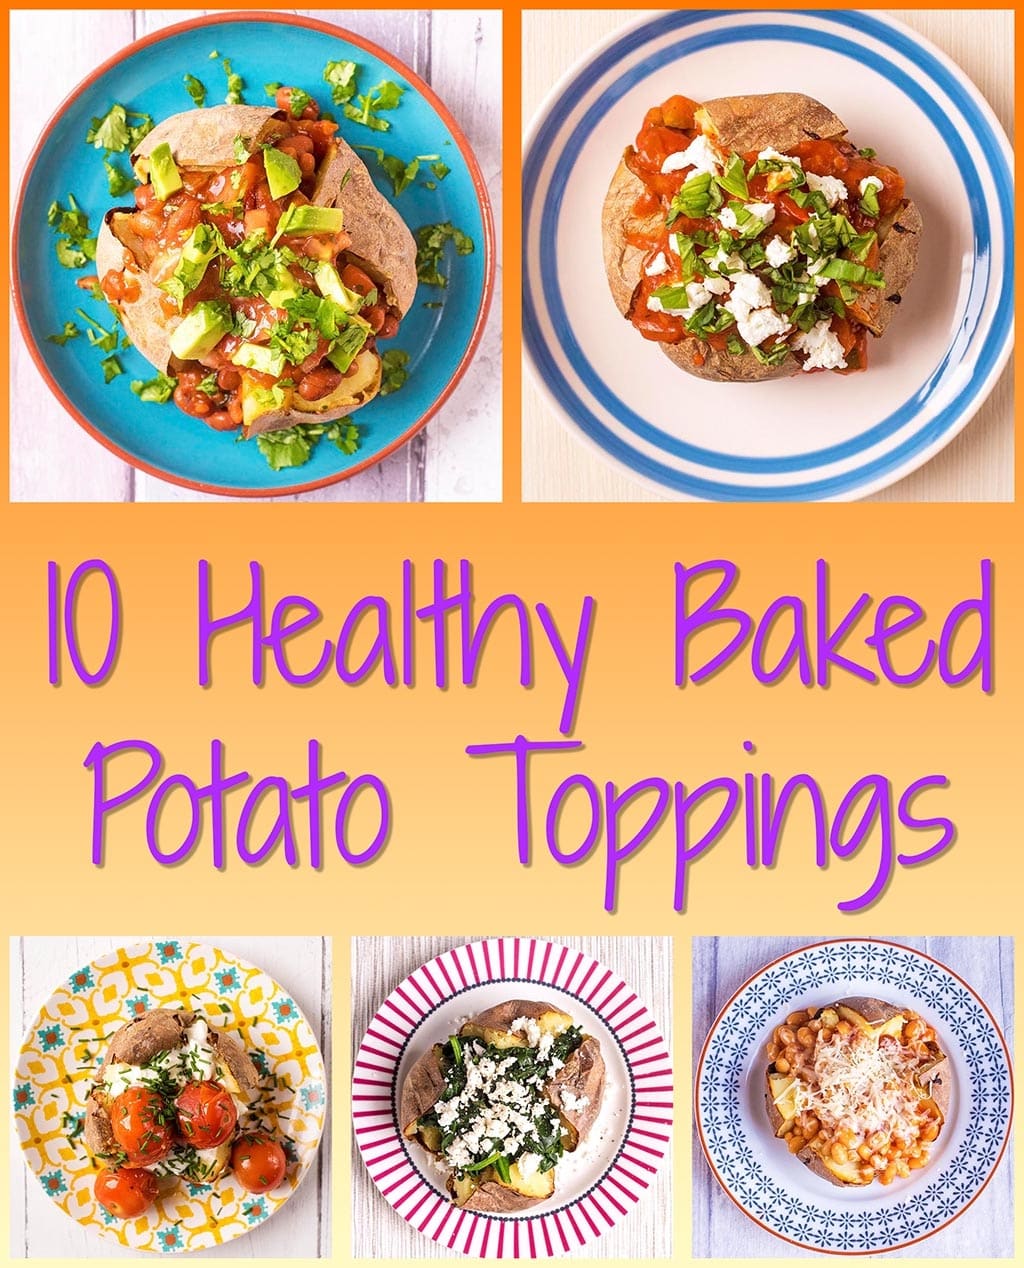 A collage of 5 baked potatoes, each with a different filling and a text overlay saying 10 Healthy Baked Potato Toppings.